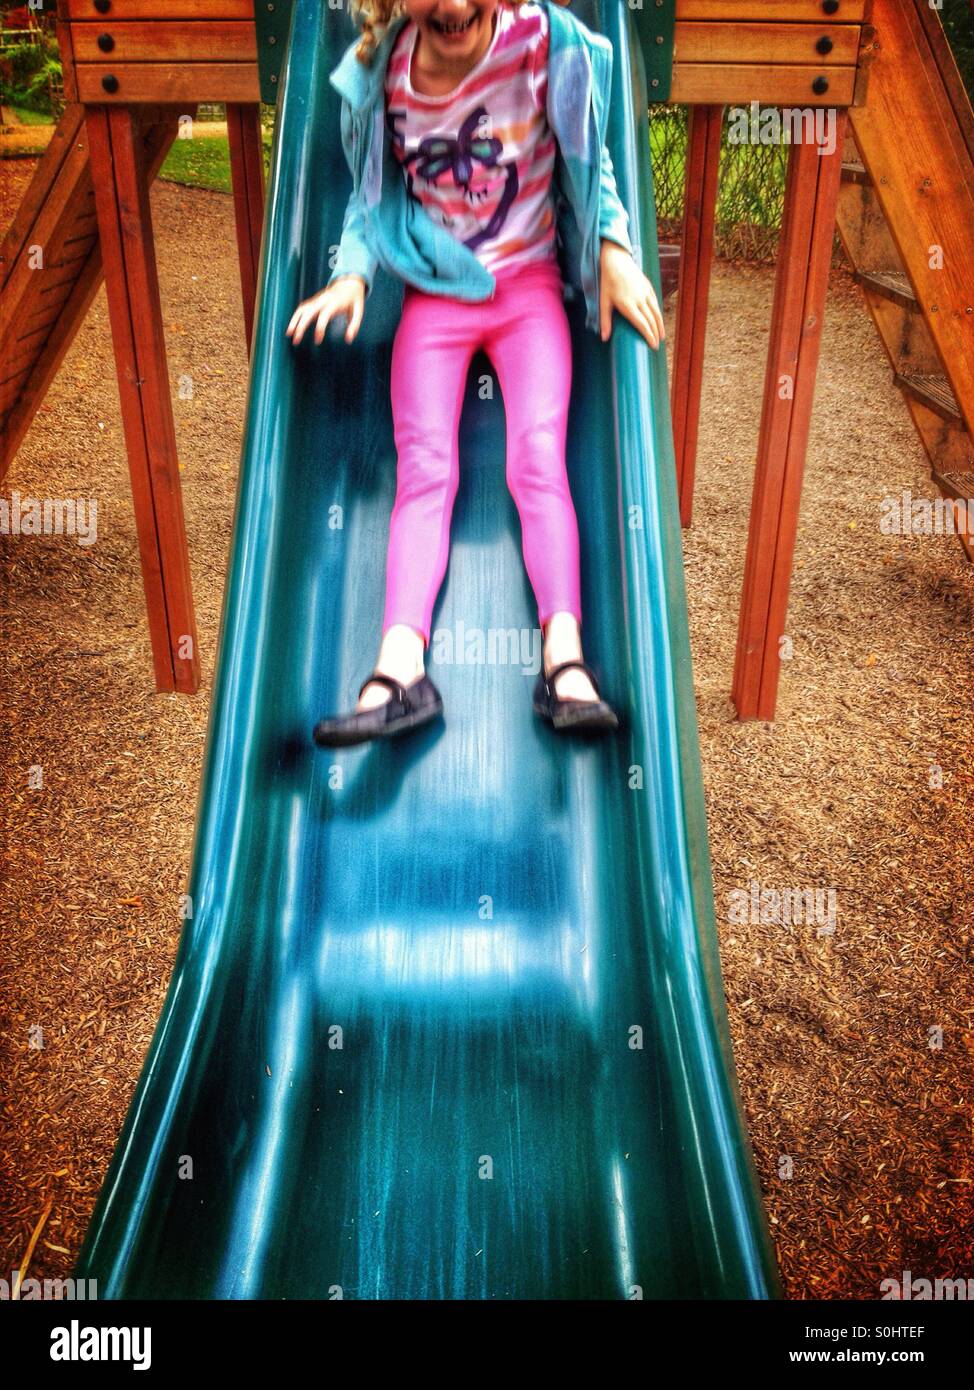 Young girl sliding down slide in playground Stock Photo